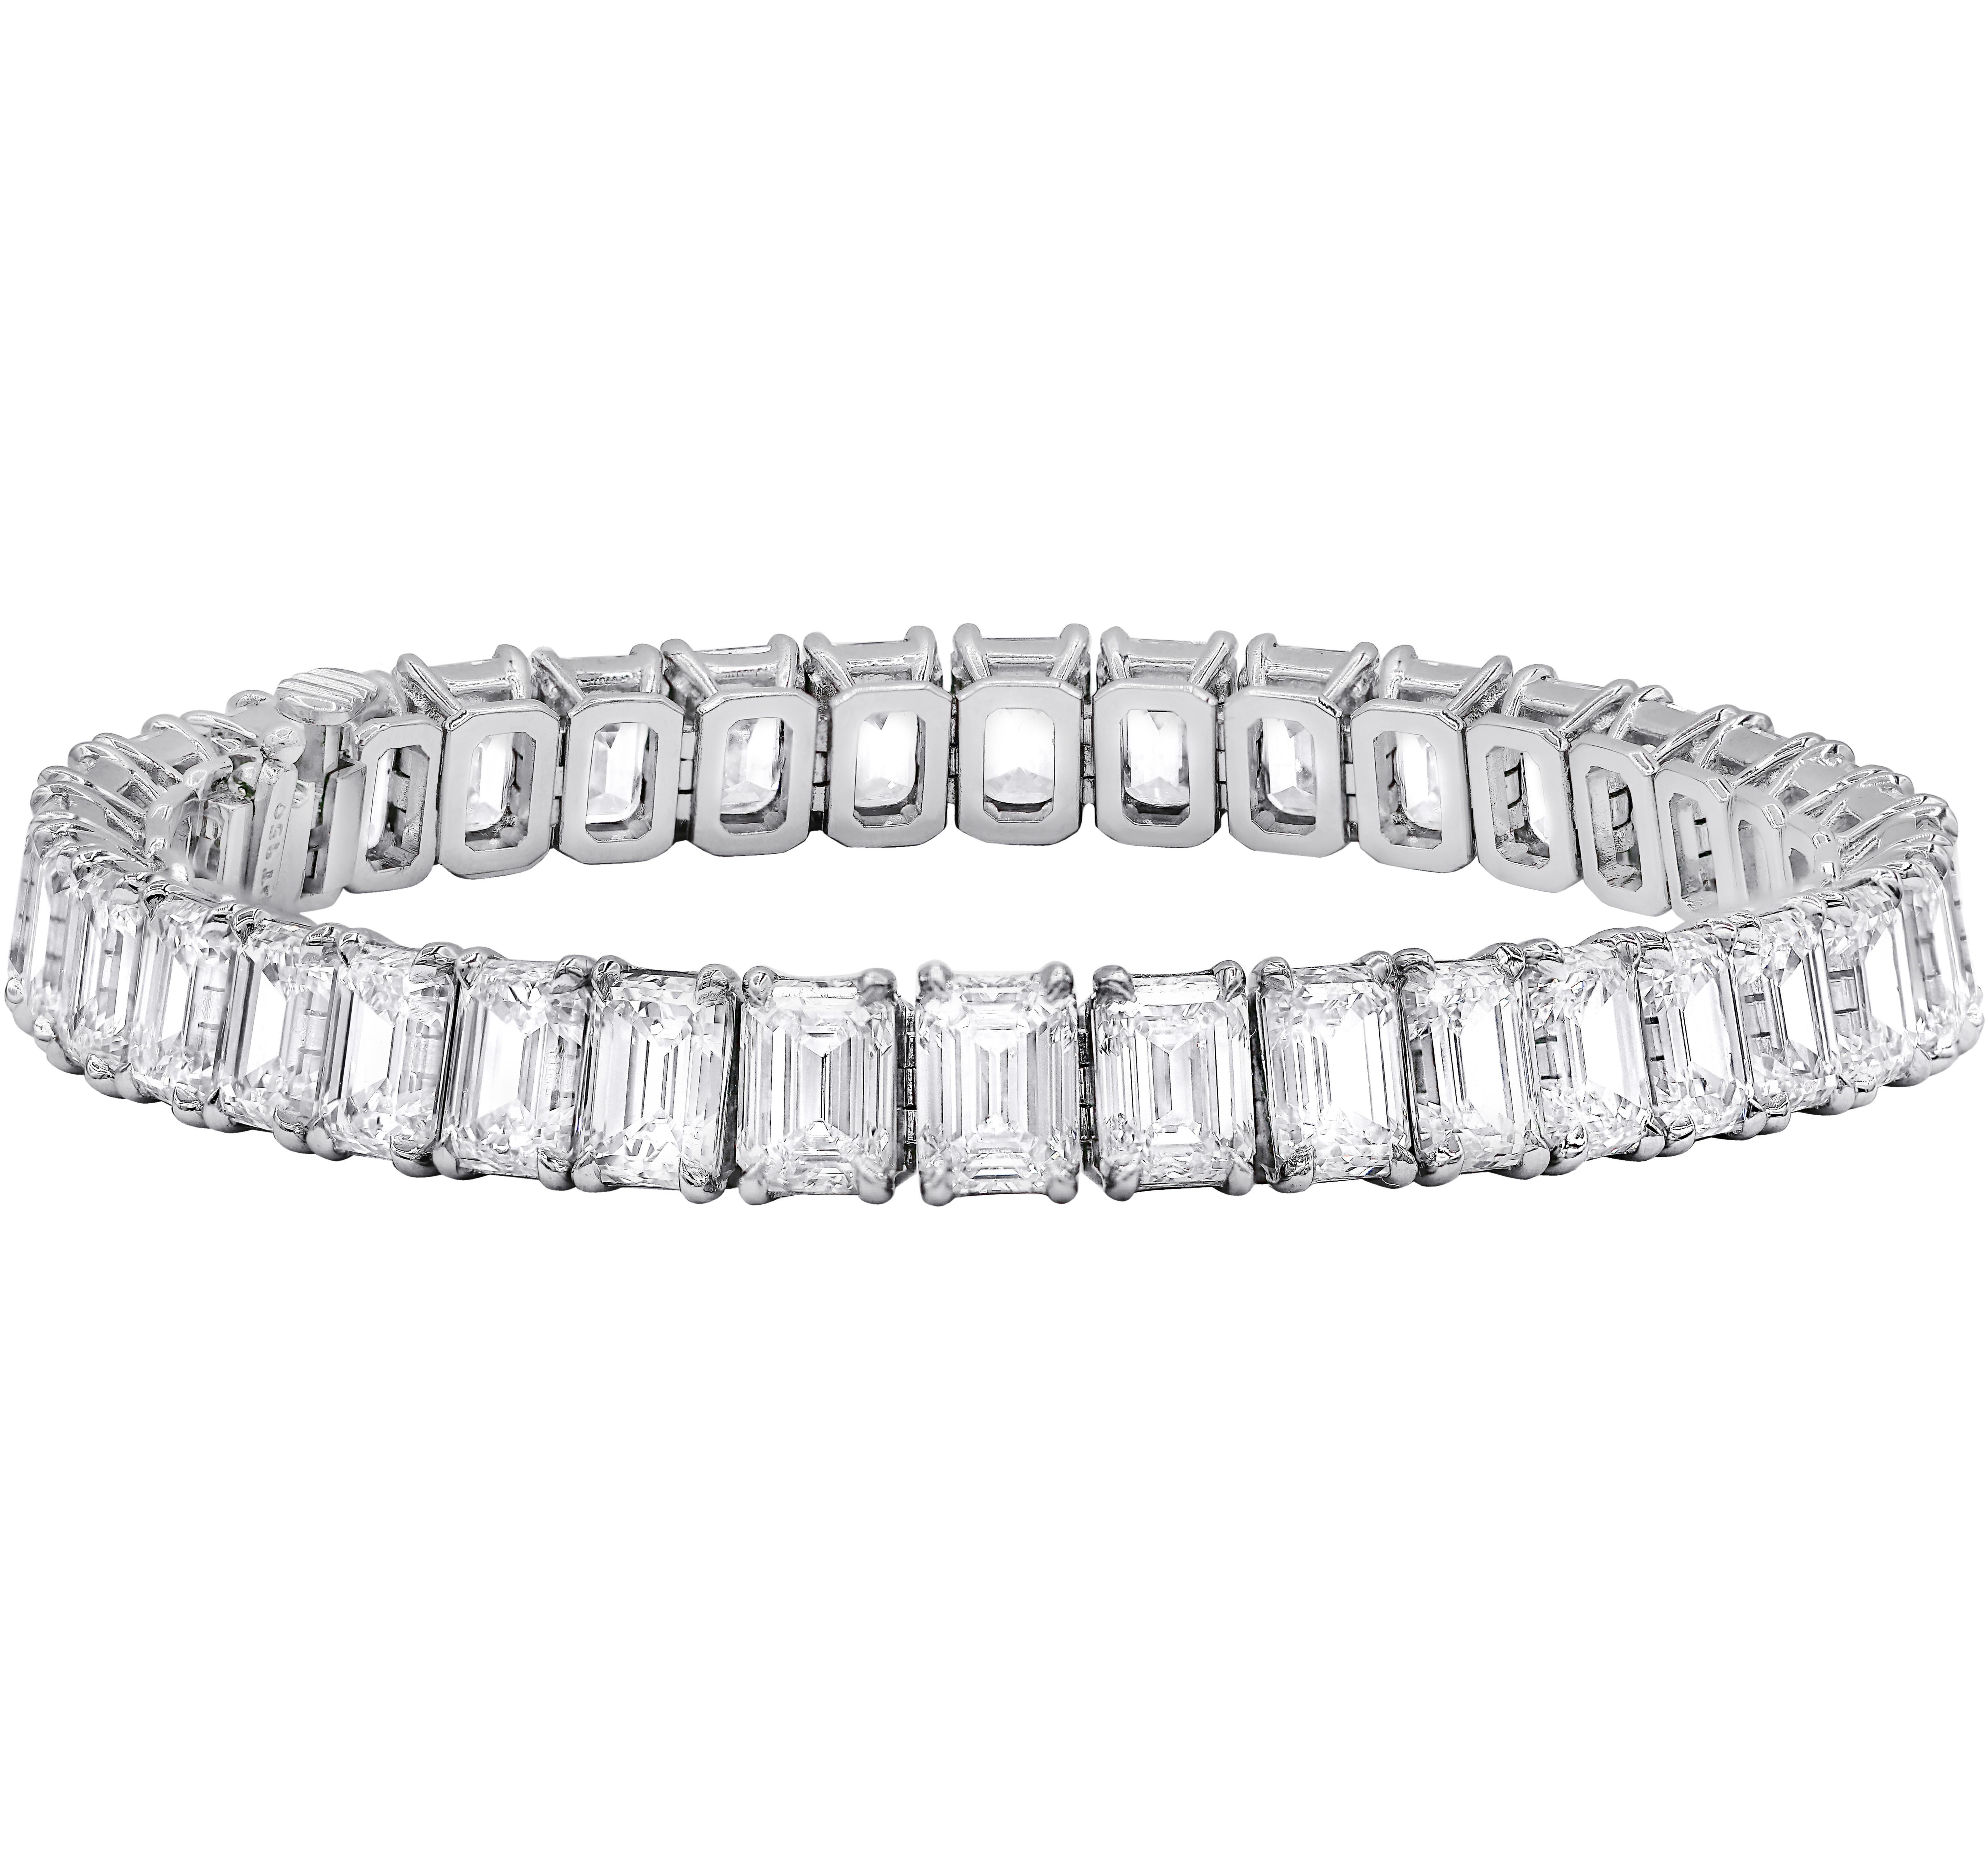 Diana M. 34.45 Carat Prong  Emerald Cut Diamond Tennis Bracelet Platinum Gold In New Condition For Sale In New York, NY